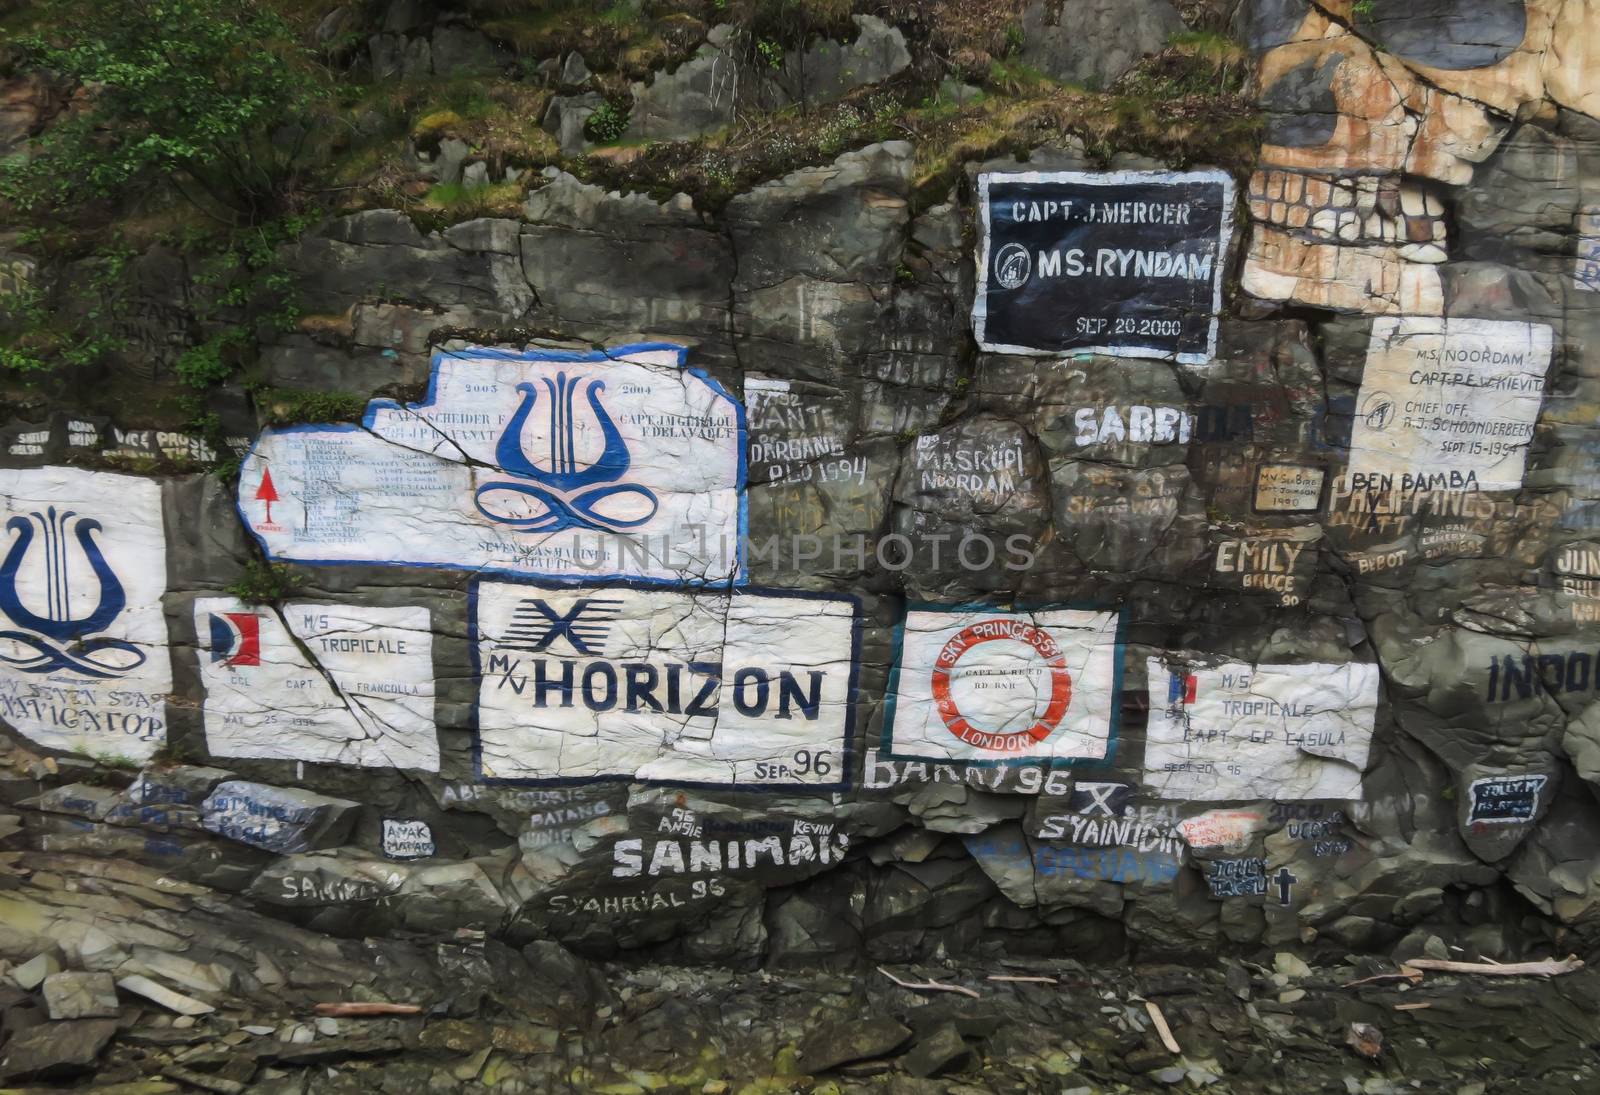 Ship Signature Wall in Skagway shows various names of ships that have docked at the harbor.
Photo taken on: June 18th, 2012